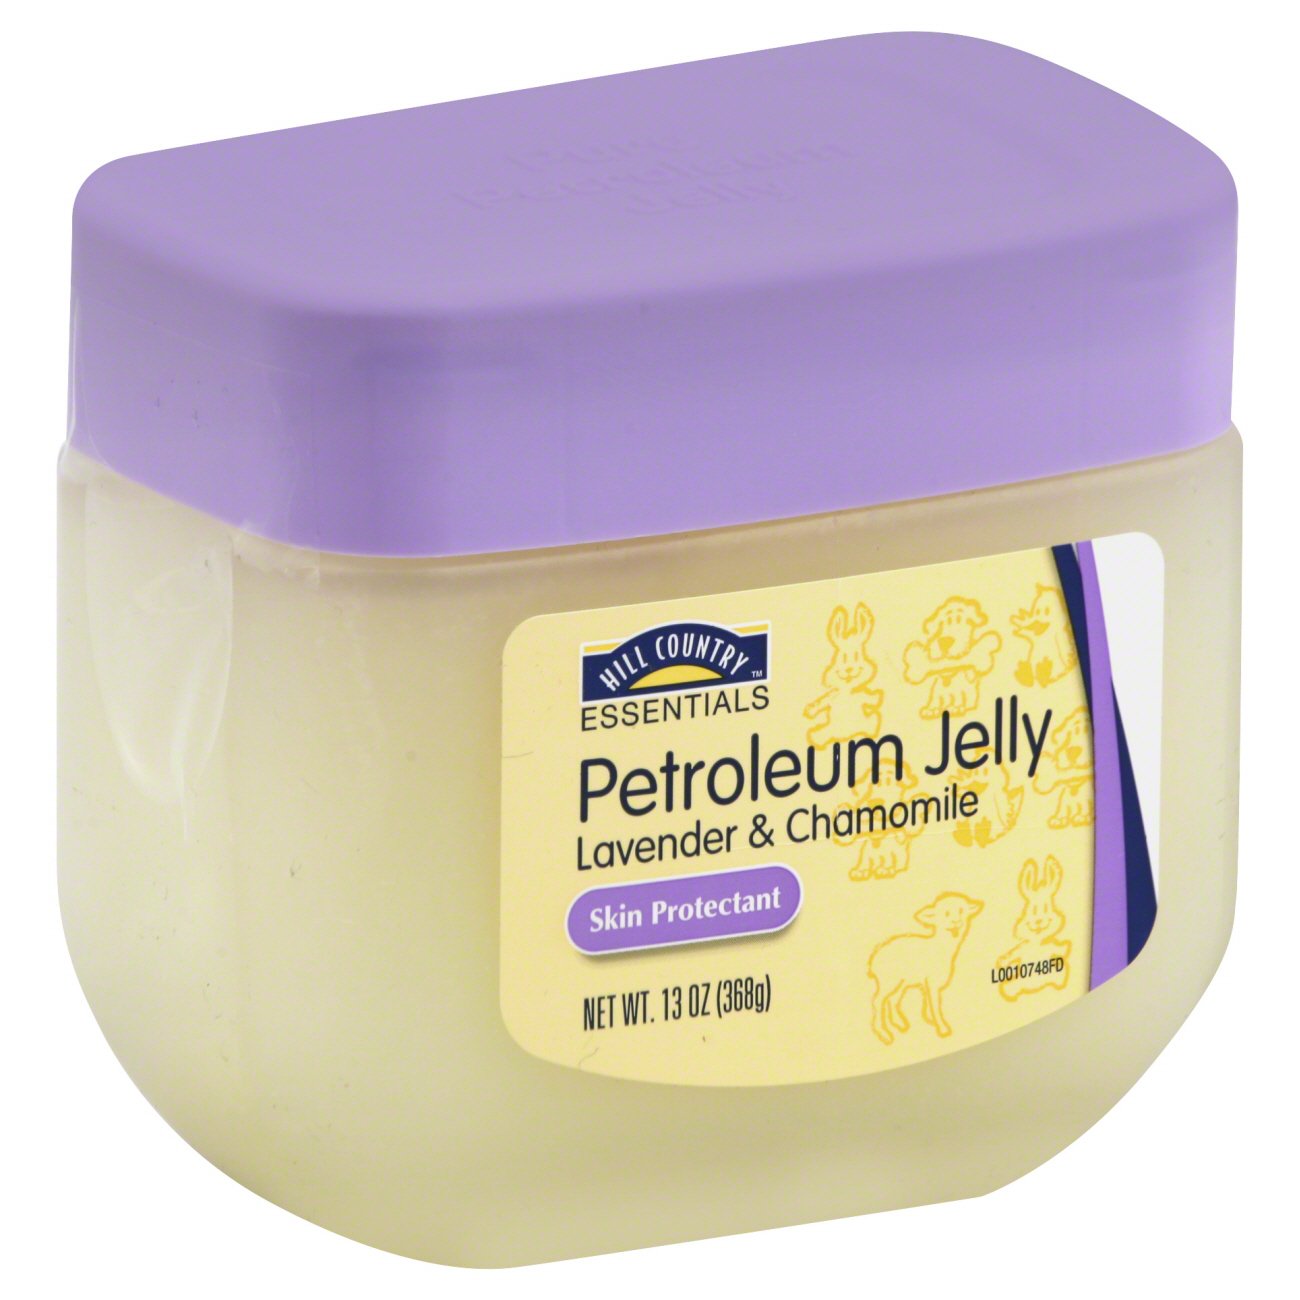 Difference between Vaseline and Petroleum Jelly